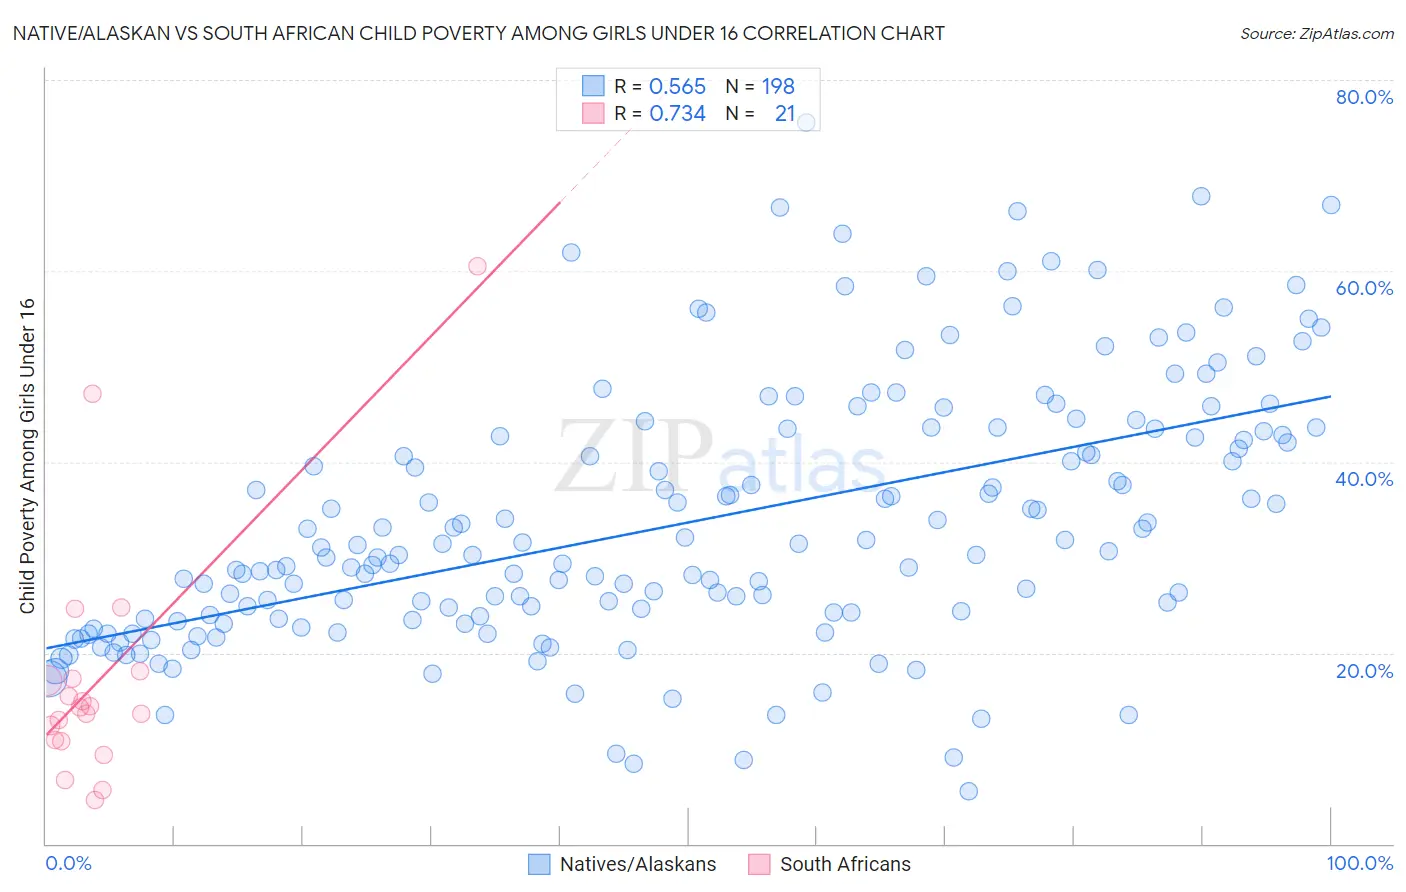 Native/Alaskan vs South African Child Poverty Among Girls Under 16